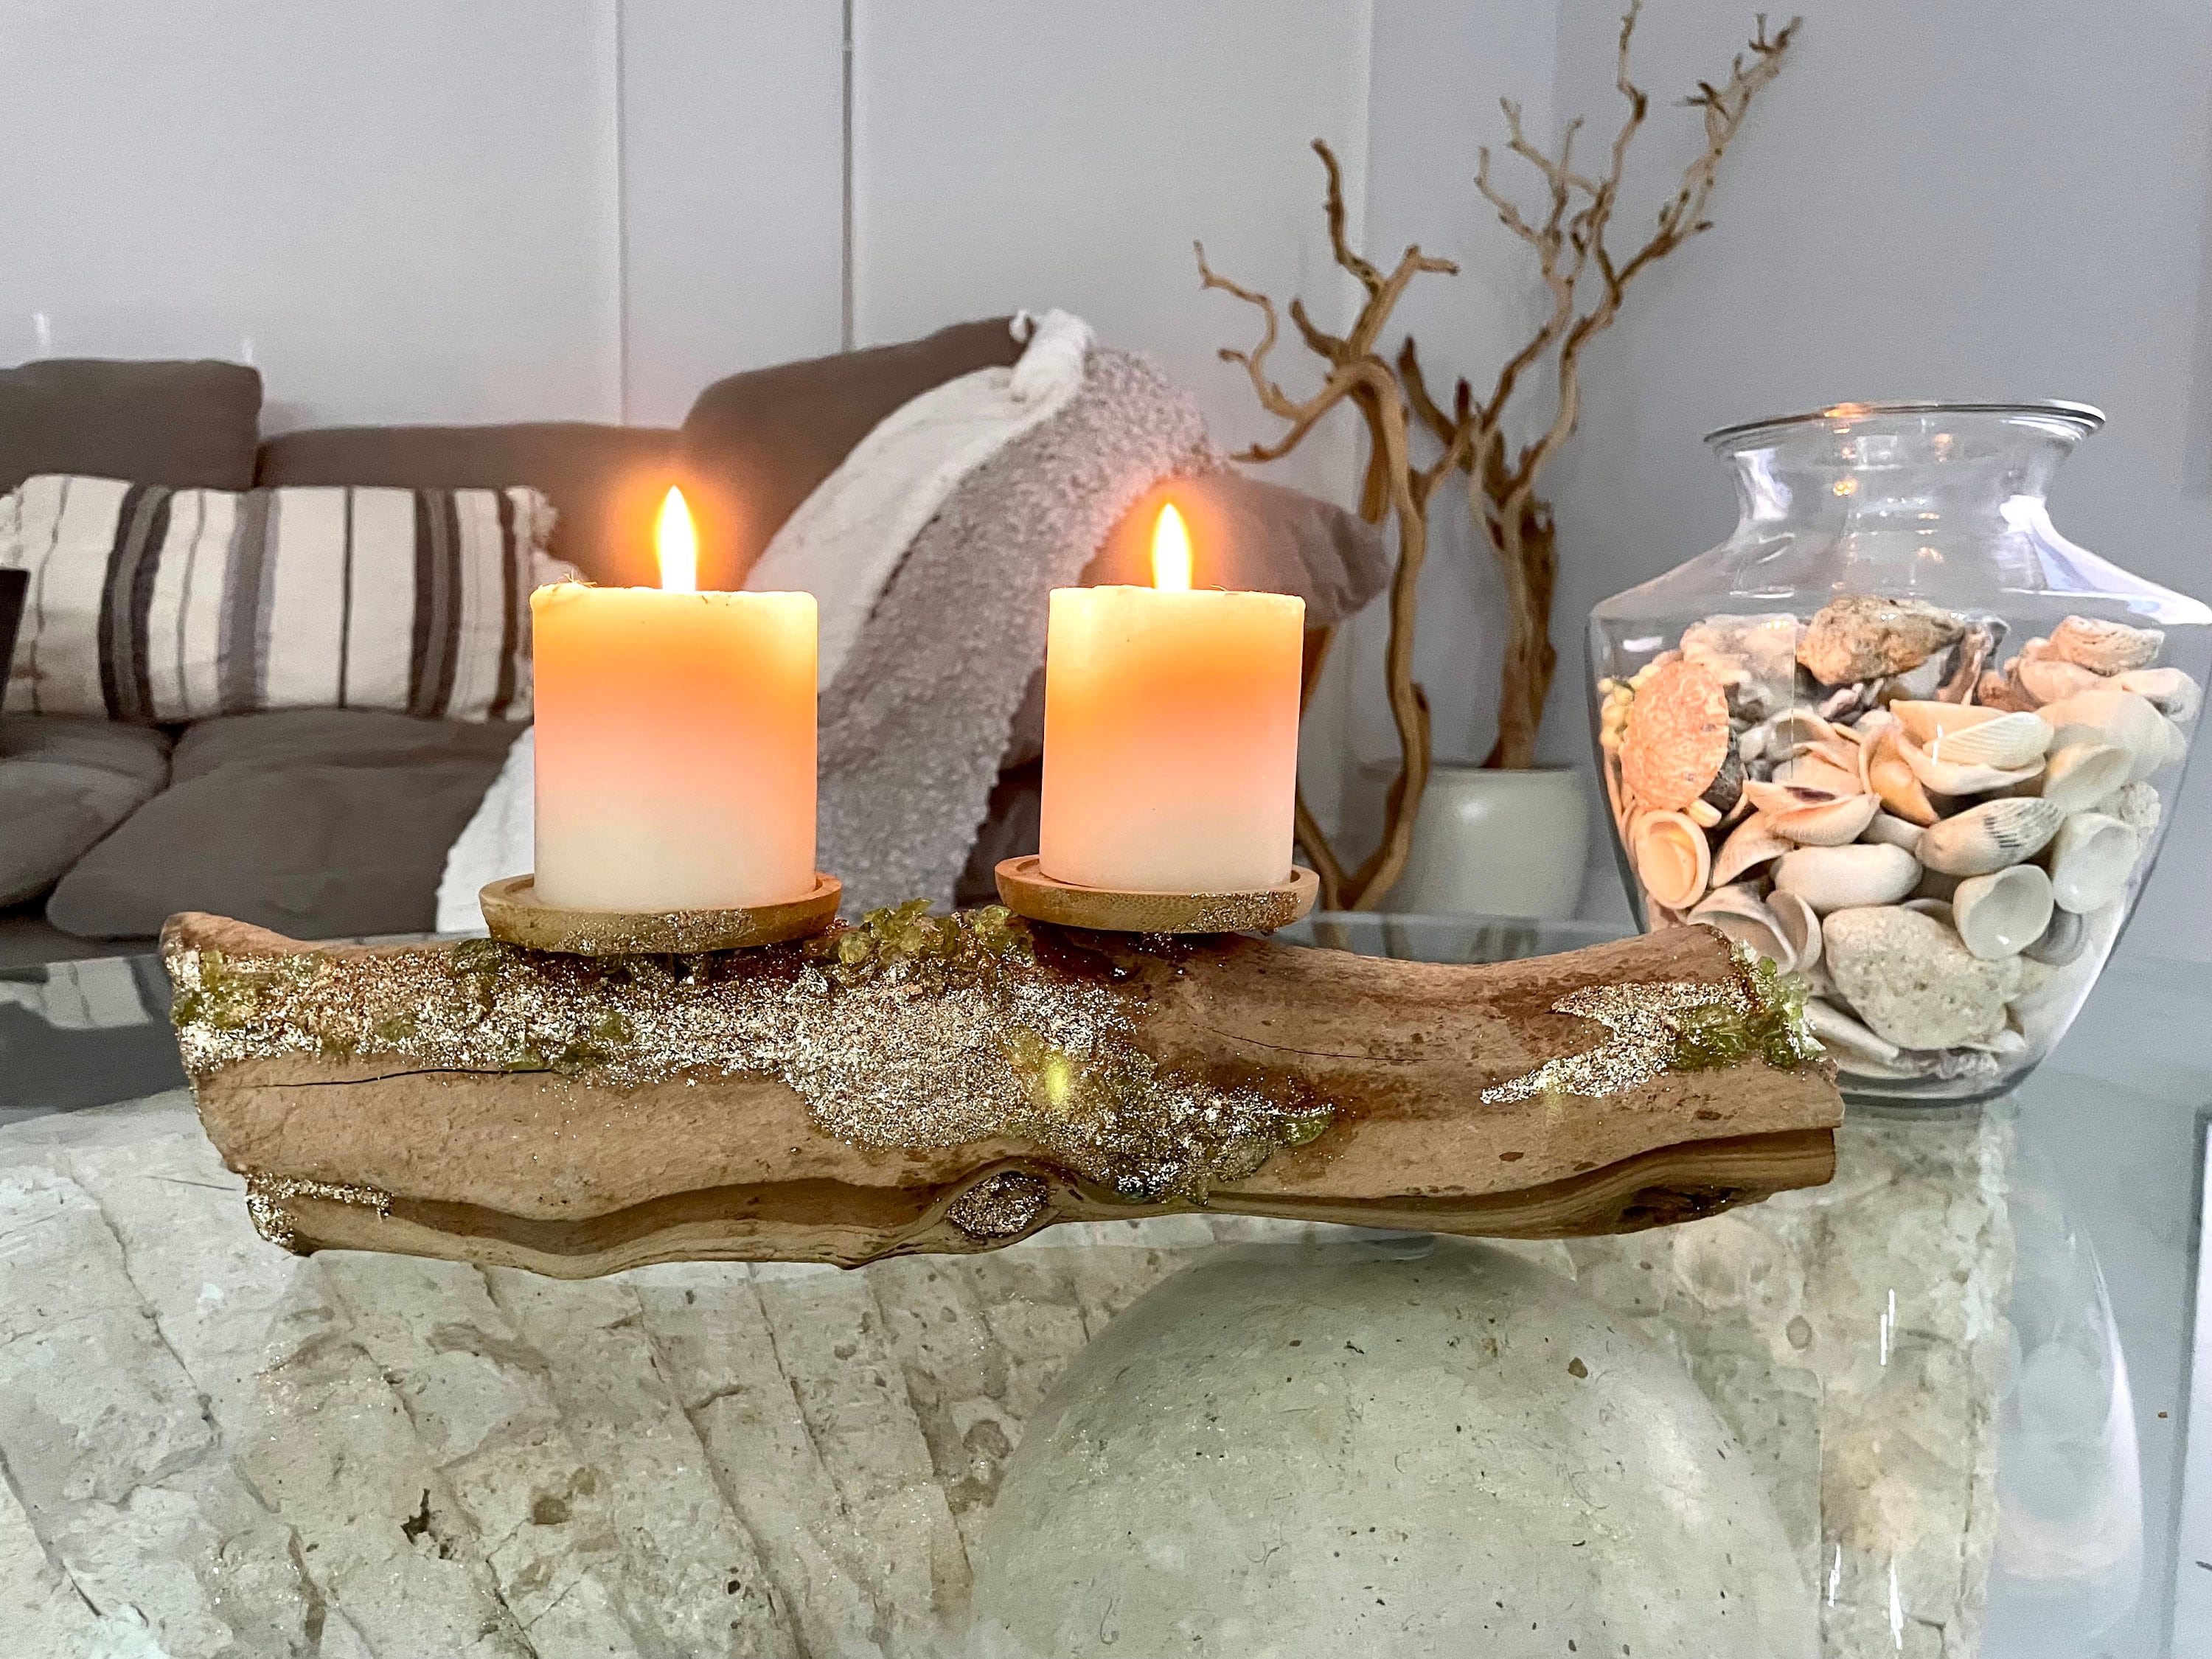 Wall-hanging Crystal & Driftwood Décor, Metal Wall Hanging